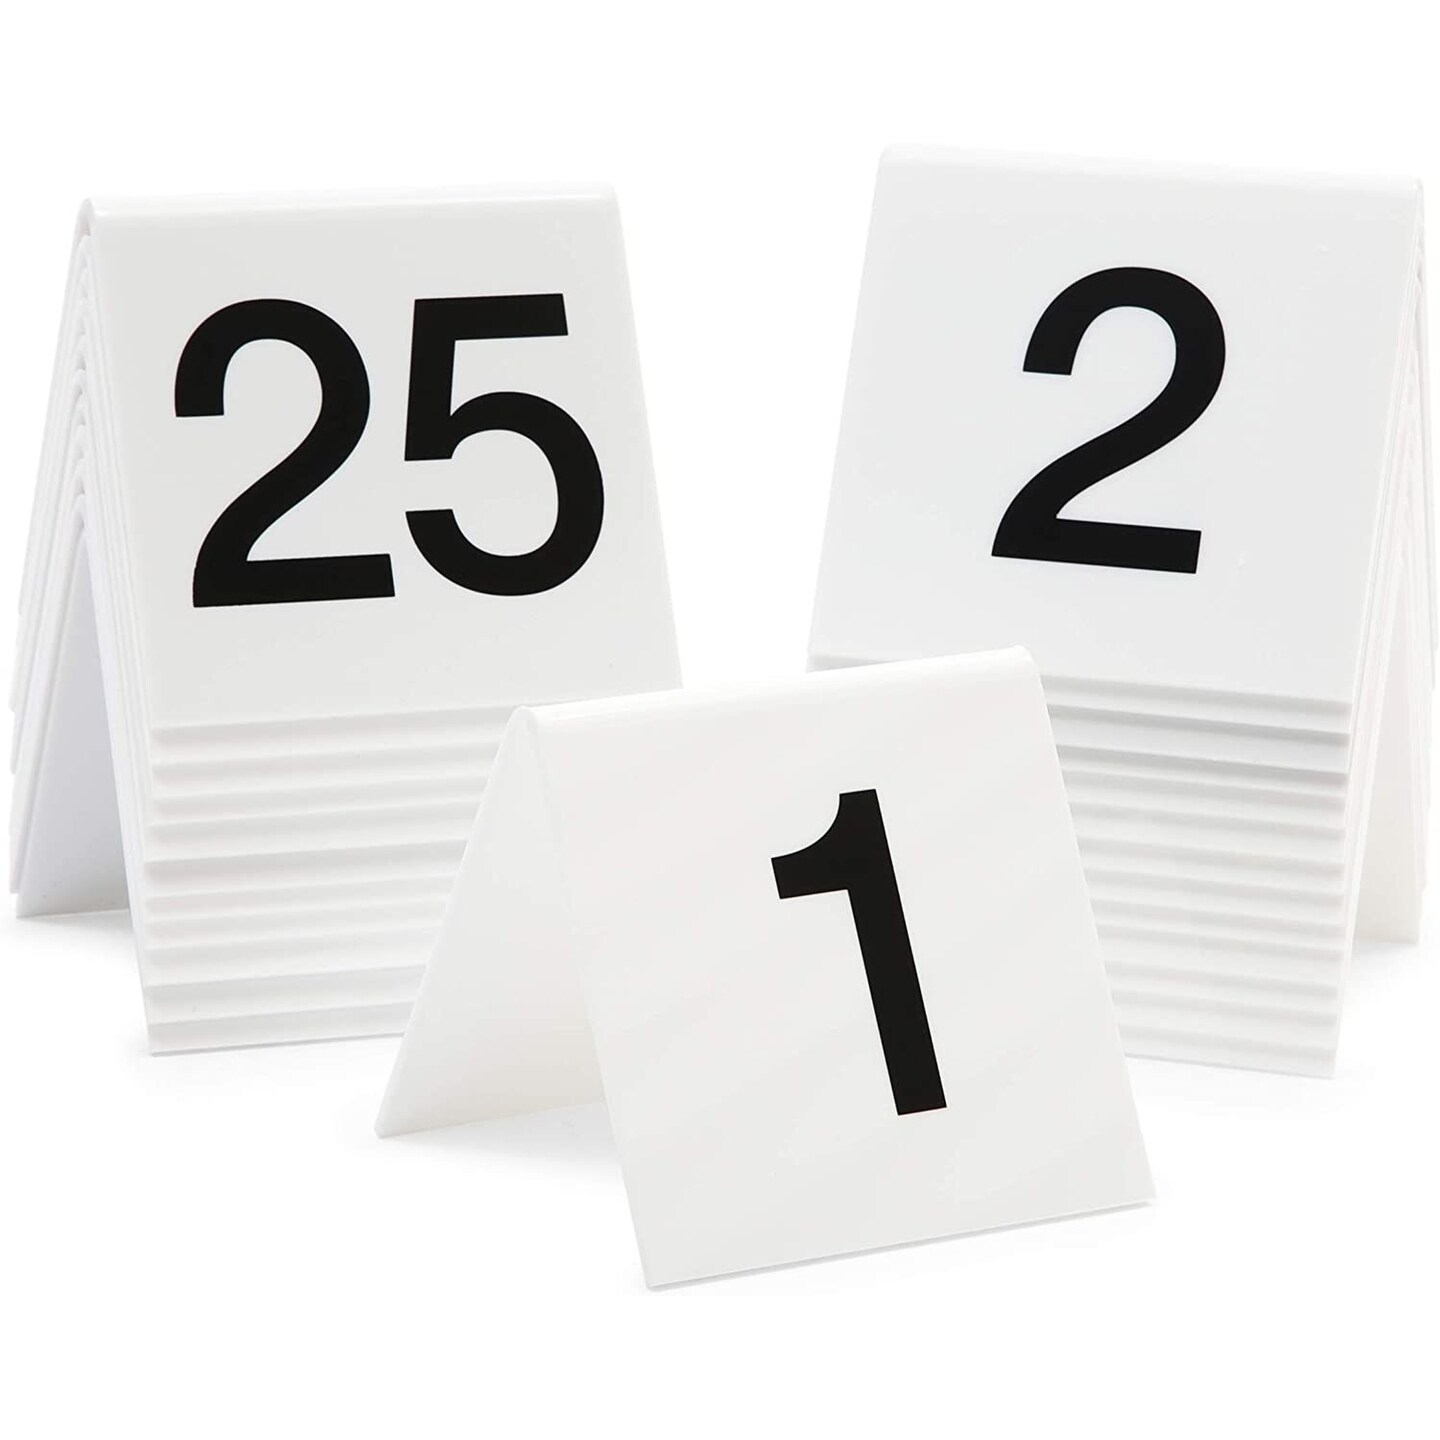 Set of 25 Acrylic Table Numbers for Wedding Receptions, 1-25 Plastic Tent Cards for Restaurants, Banquets (3 x 2.75 x 2.5 In)